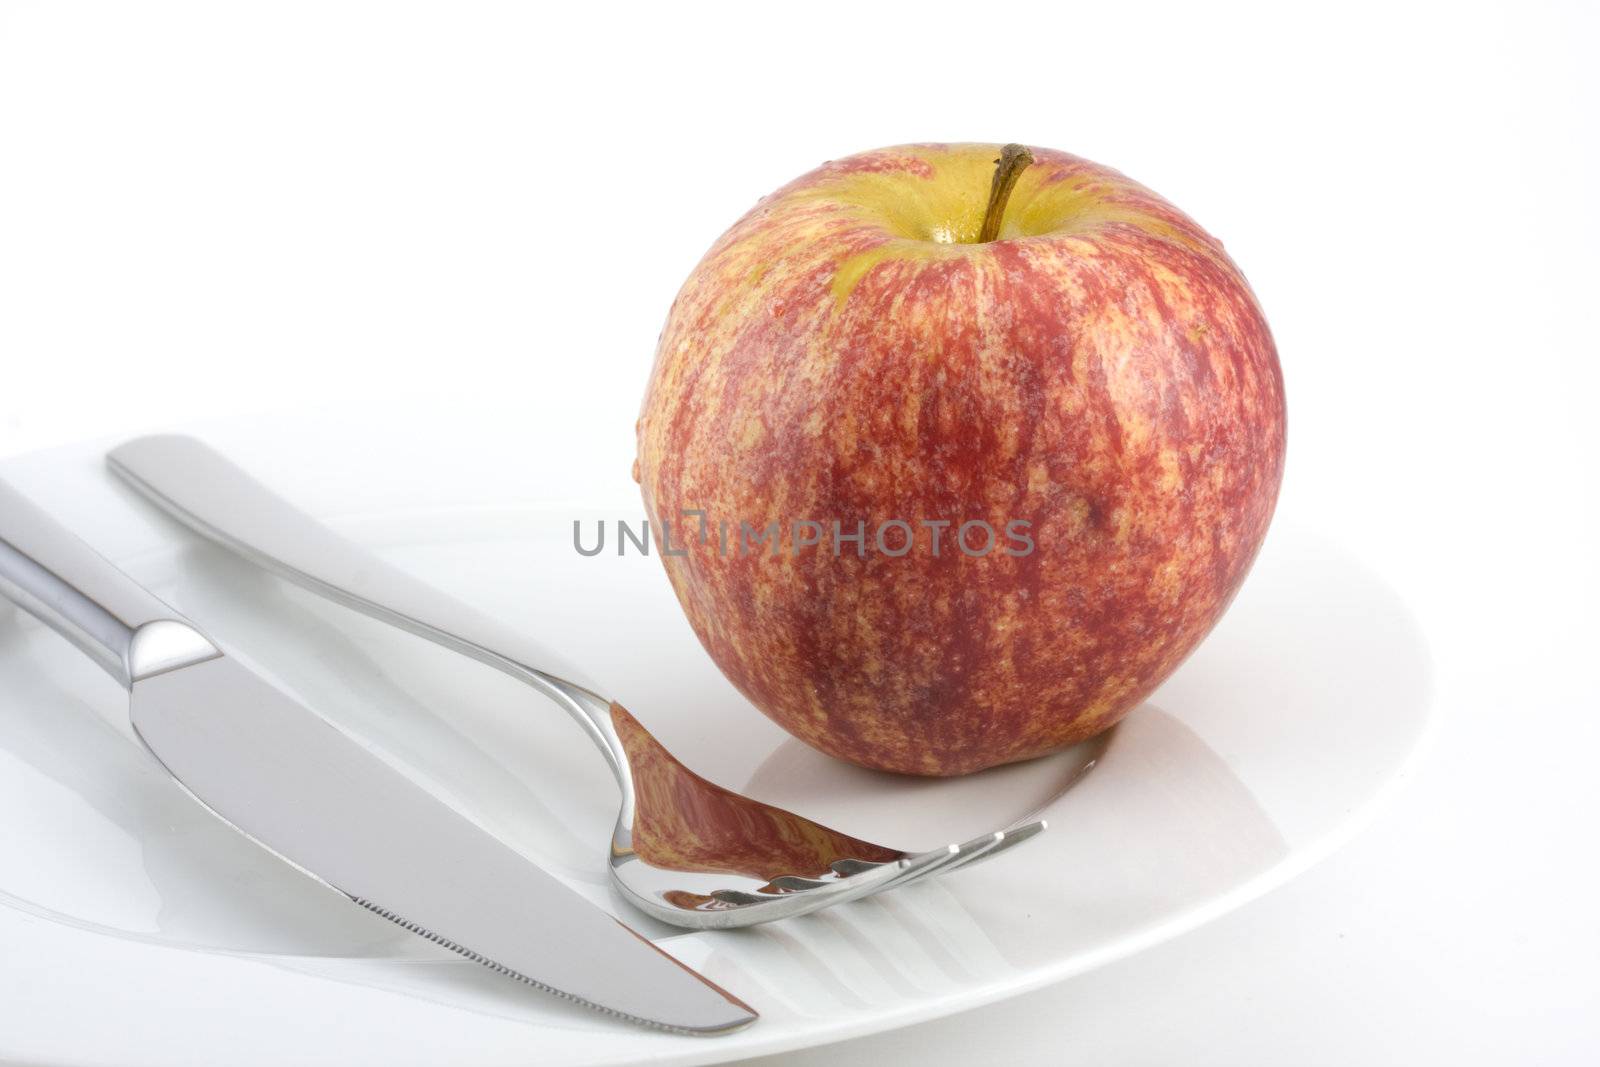 cutlery and an apple on a plate by bernjuer